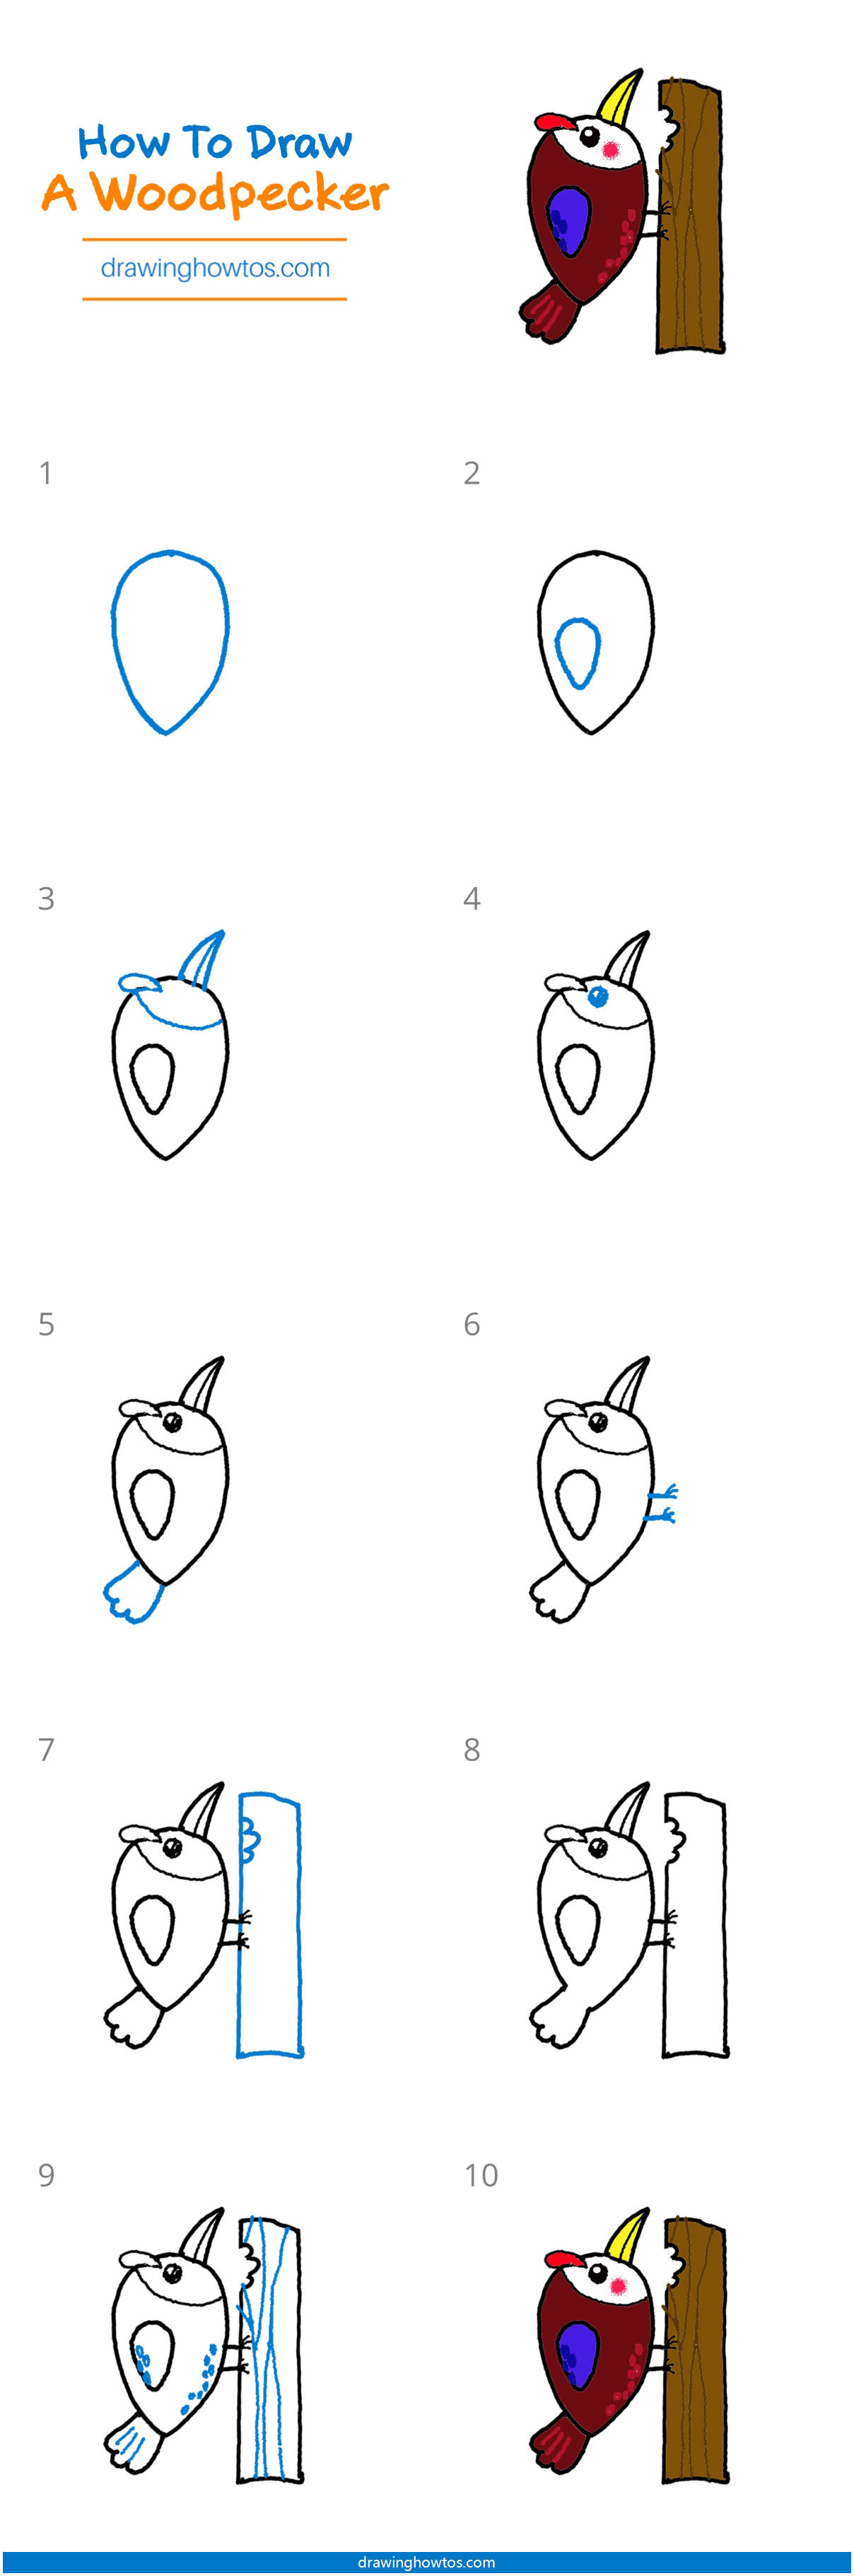 How to Draw a Woodpecker - Step by Step Easy Drawing Guides - Drawing